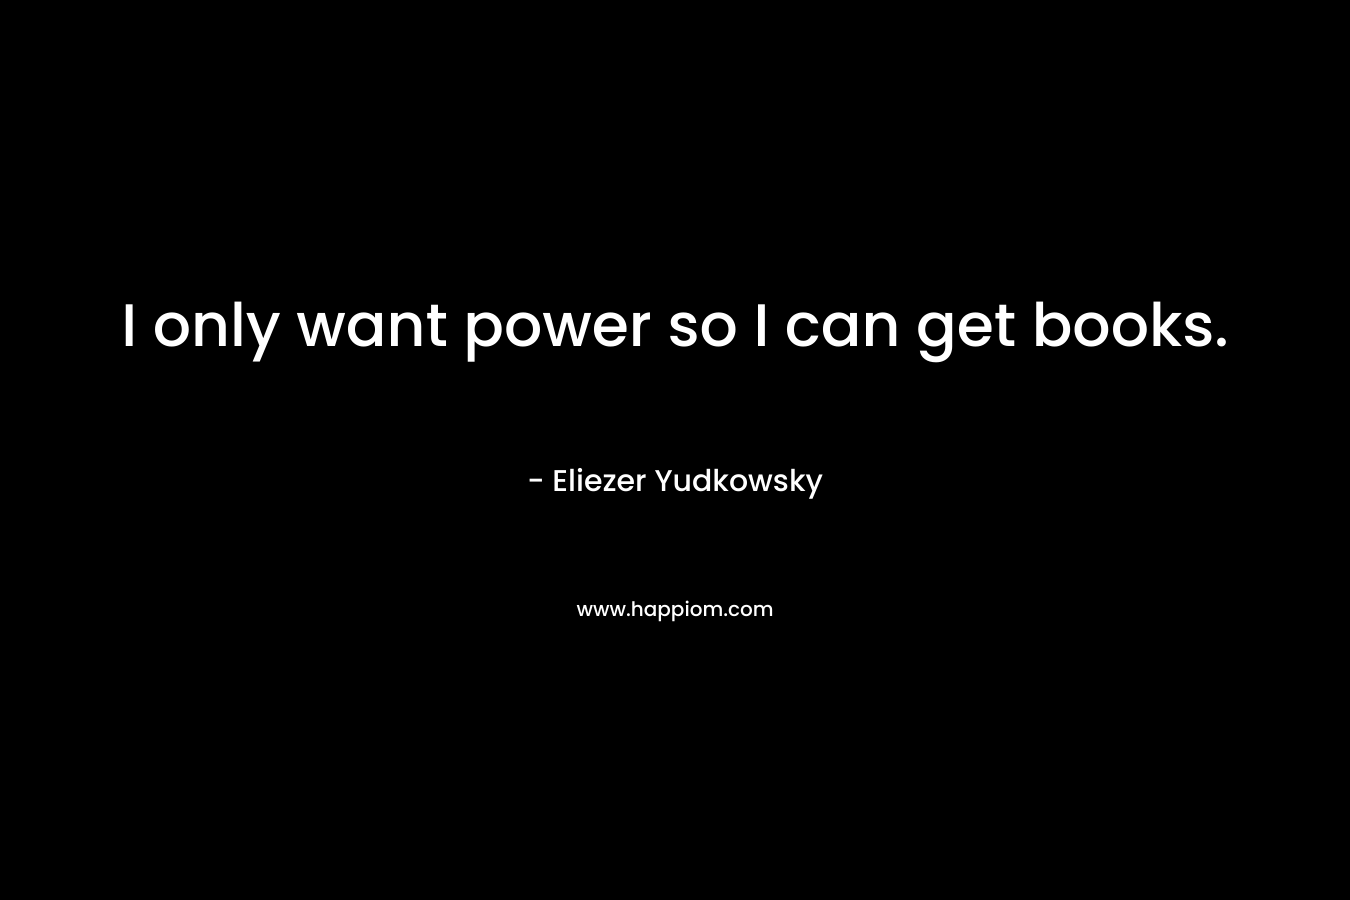 I only want power so I can get books. – Eliezer Yudkowsky